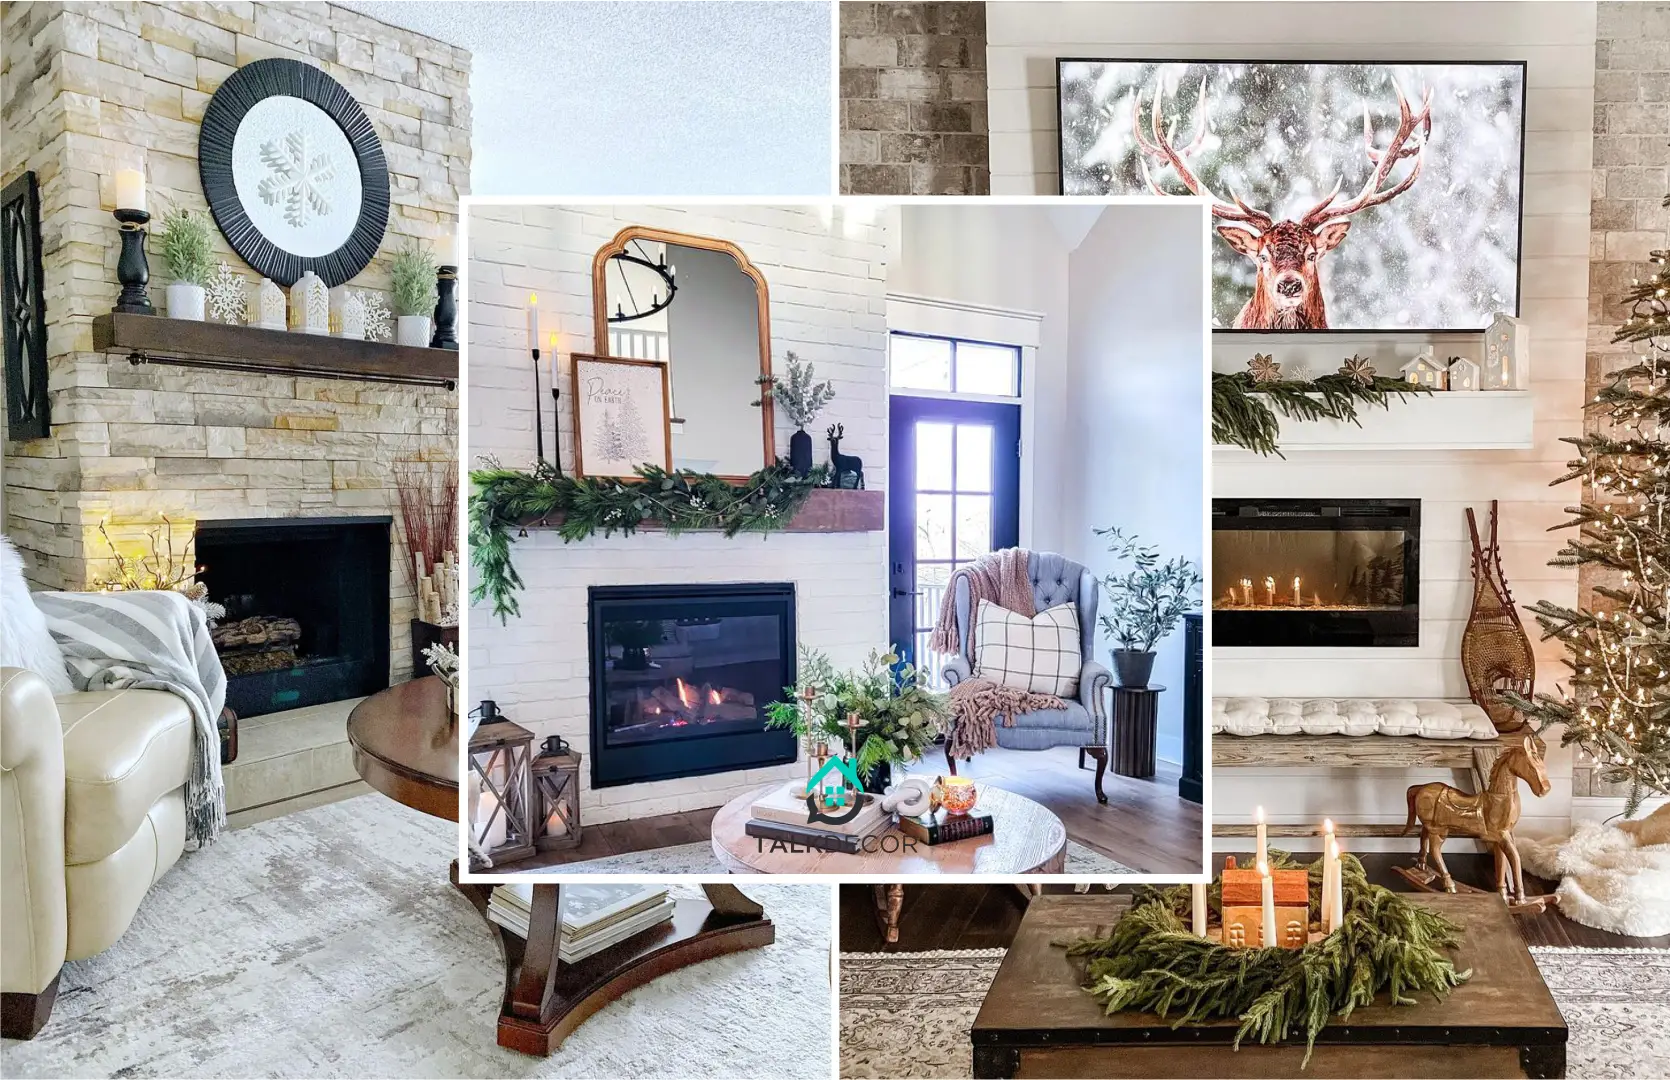 10 Best Living Room Decor with Fireplace for a Cozy Winter